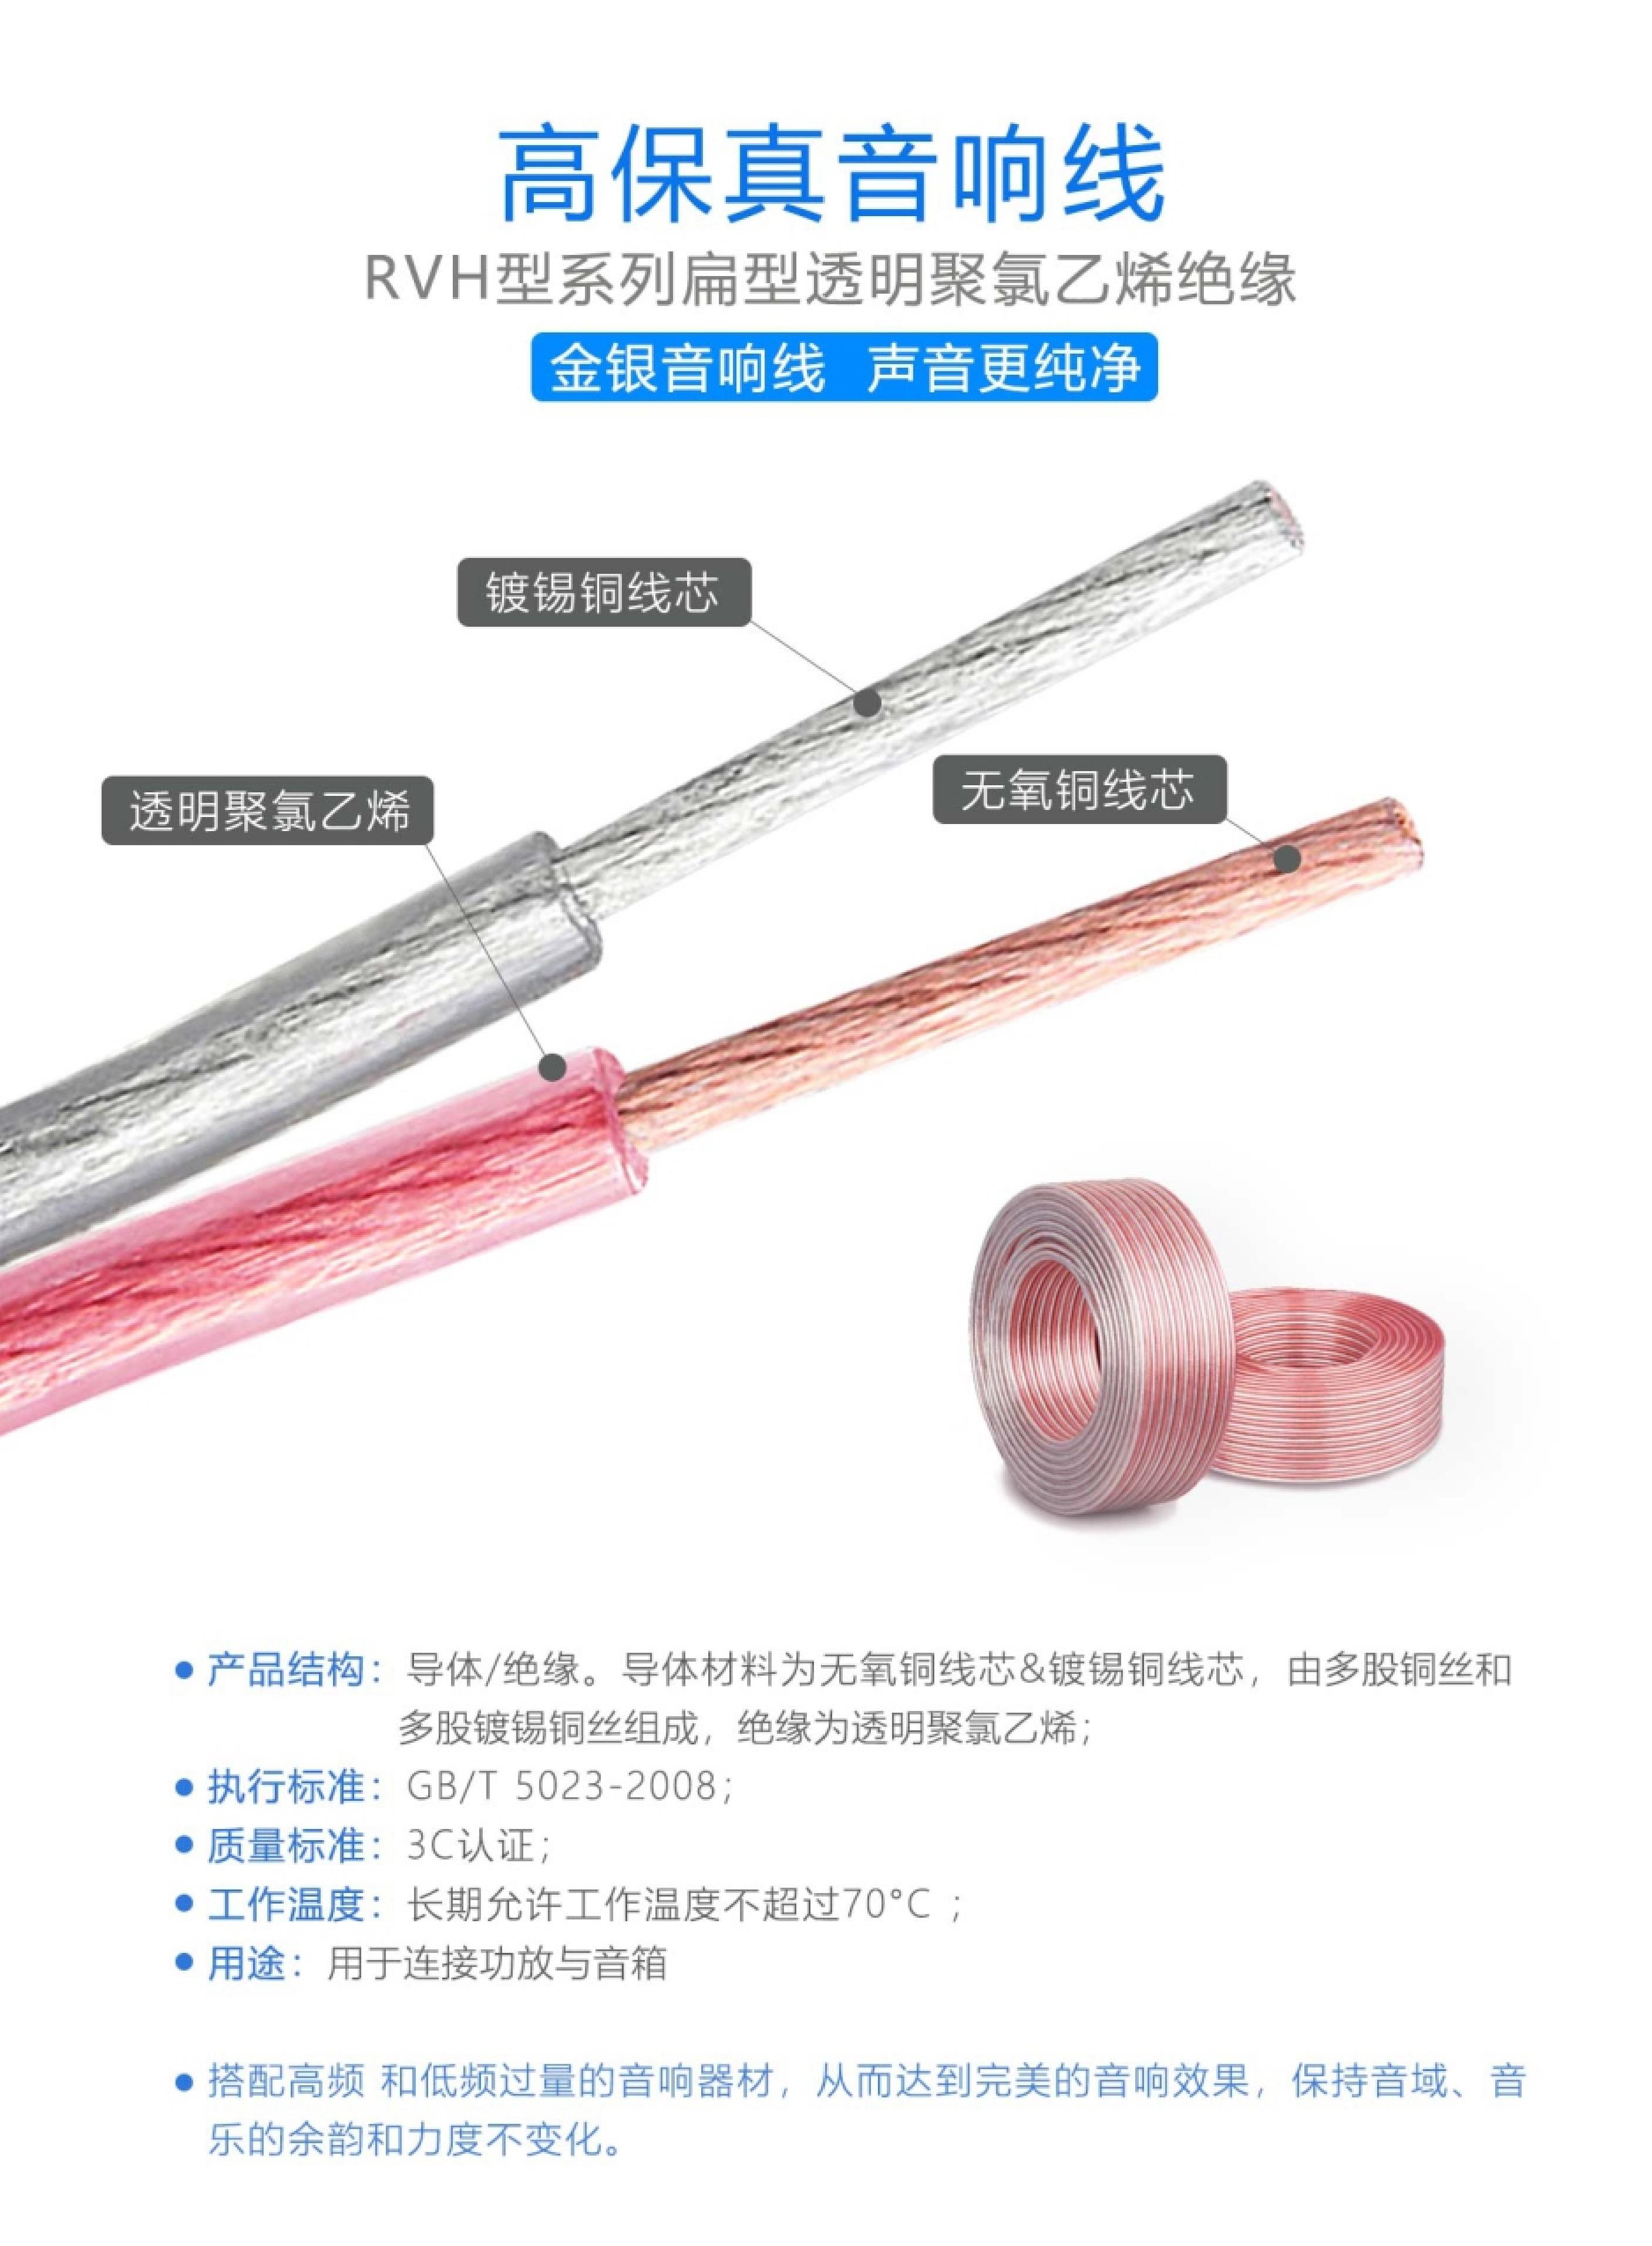 Power cable RVH